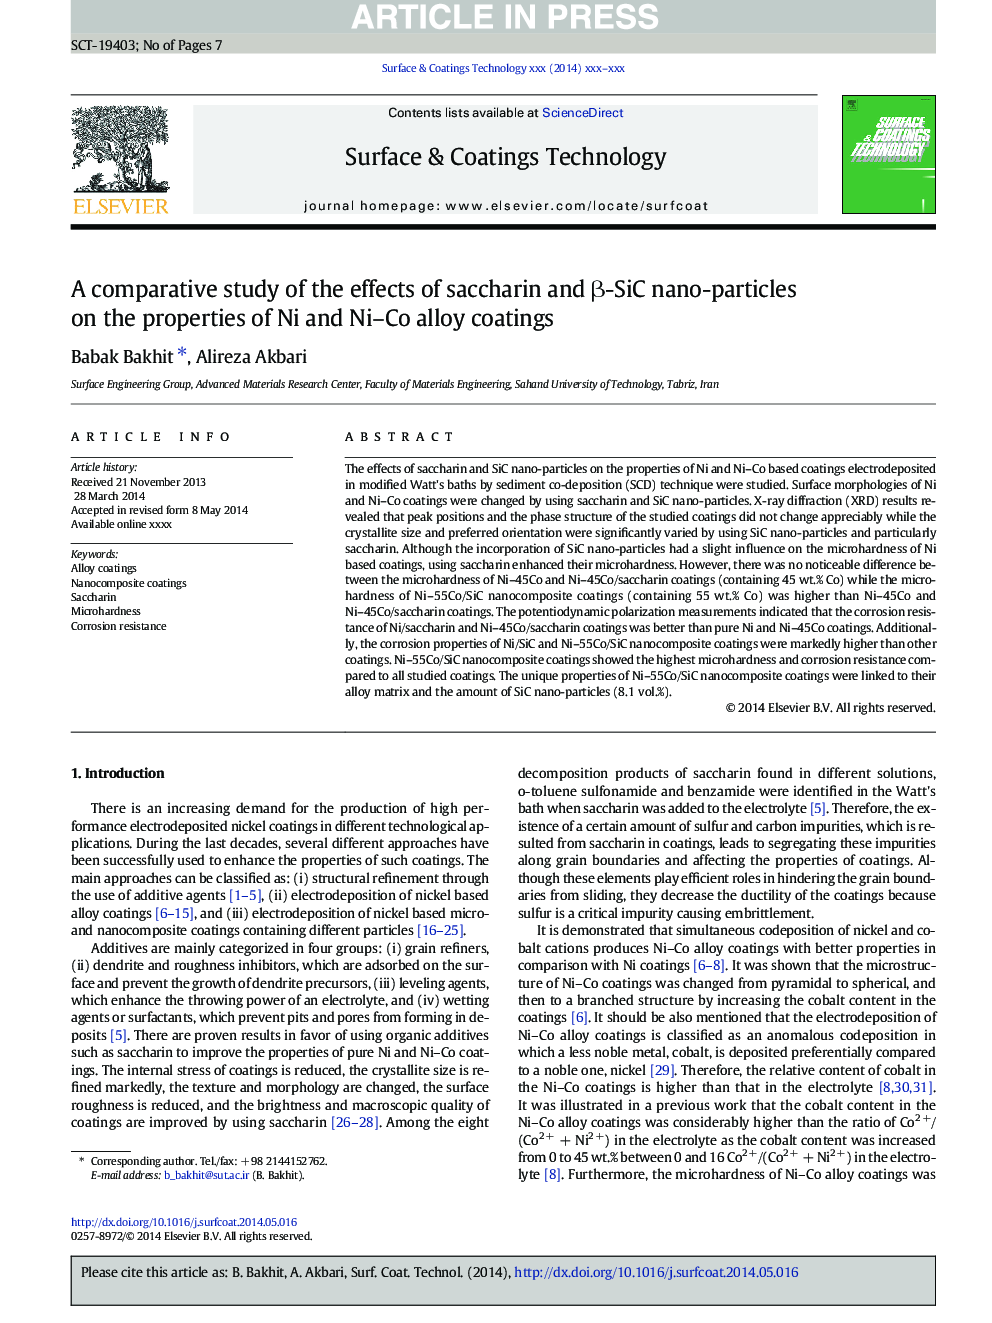 A comparative study of the effects of saccharin and Î²-SiC nano-particles on the properties of Ni and Ni-Co alloy coatings